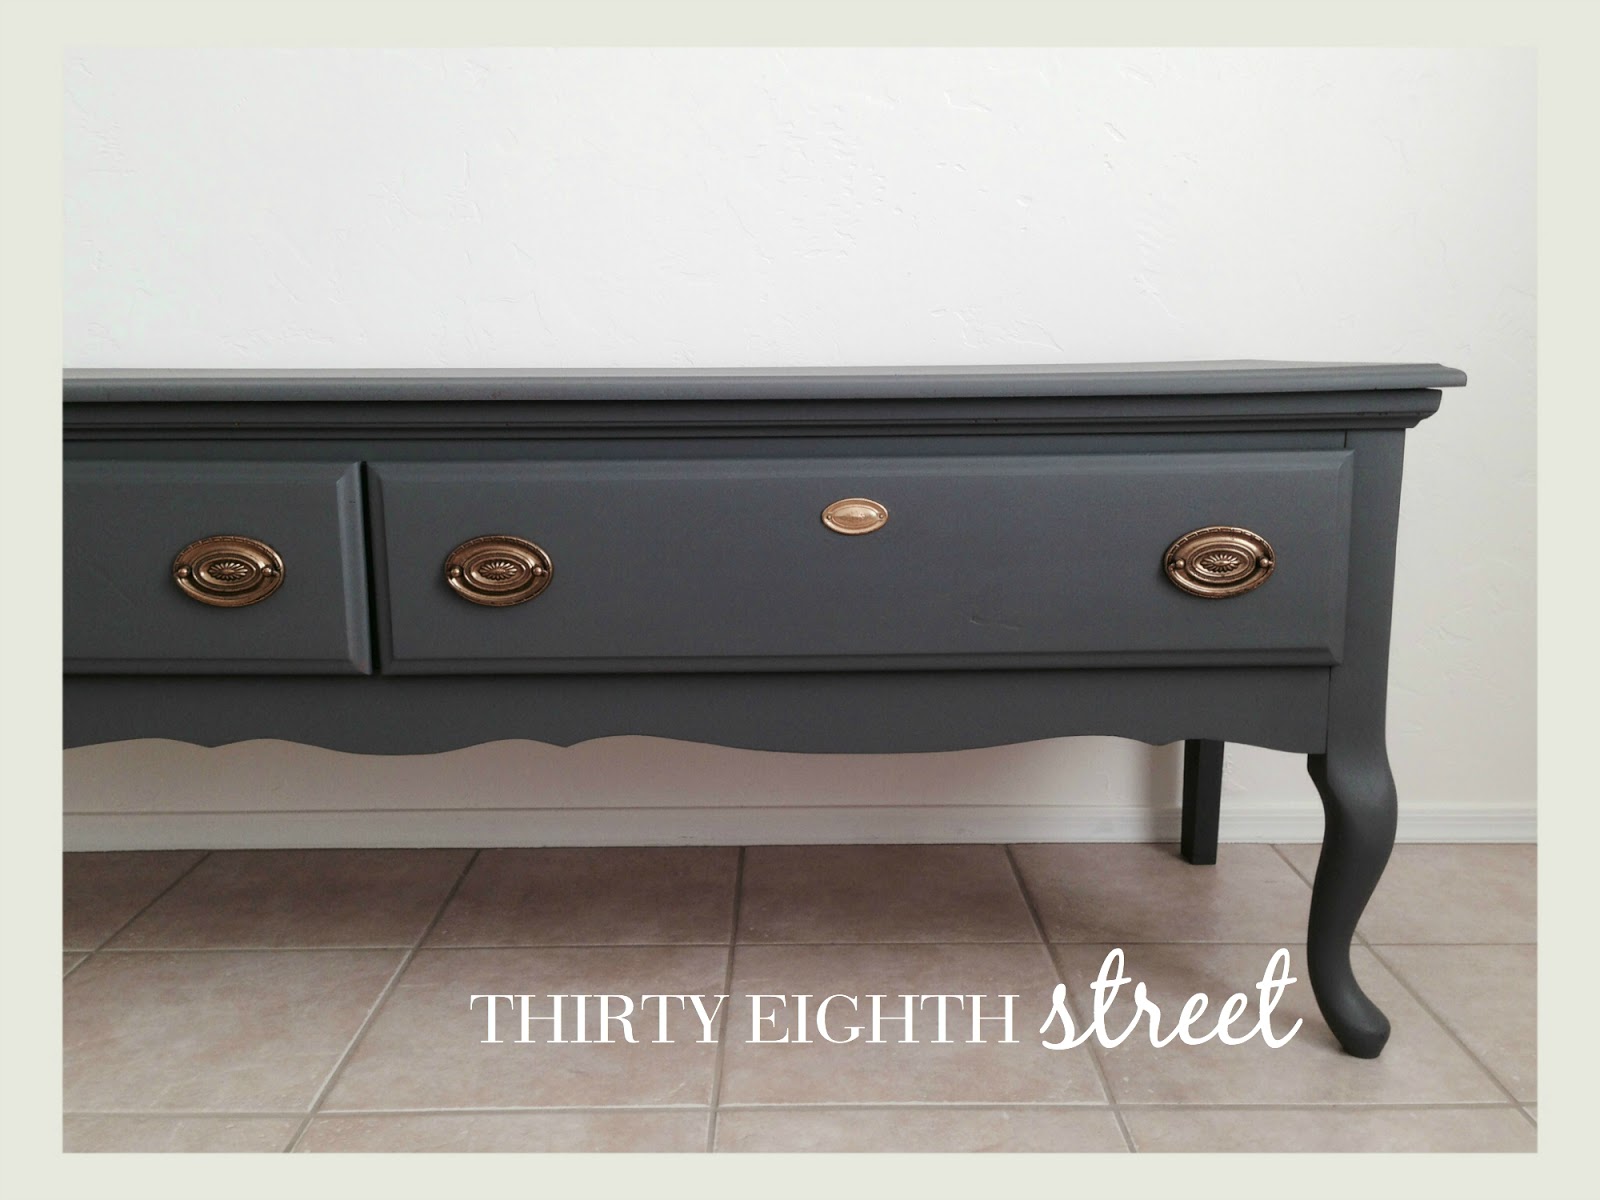 refinished bench using prairie colors, telegram, painted bench, bench makeover, 